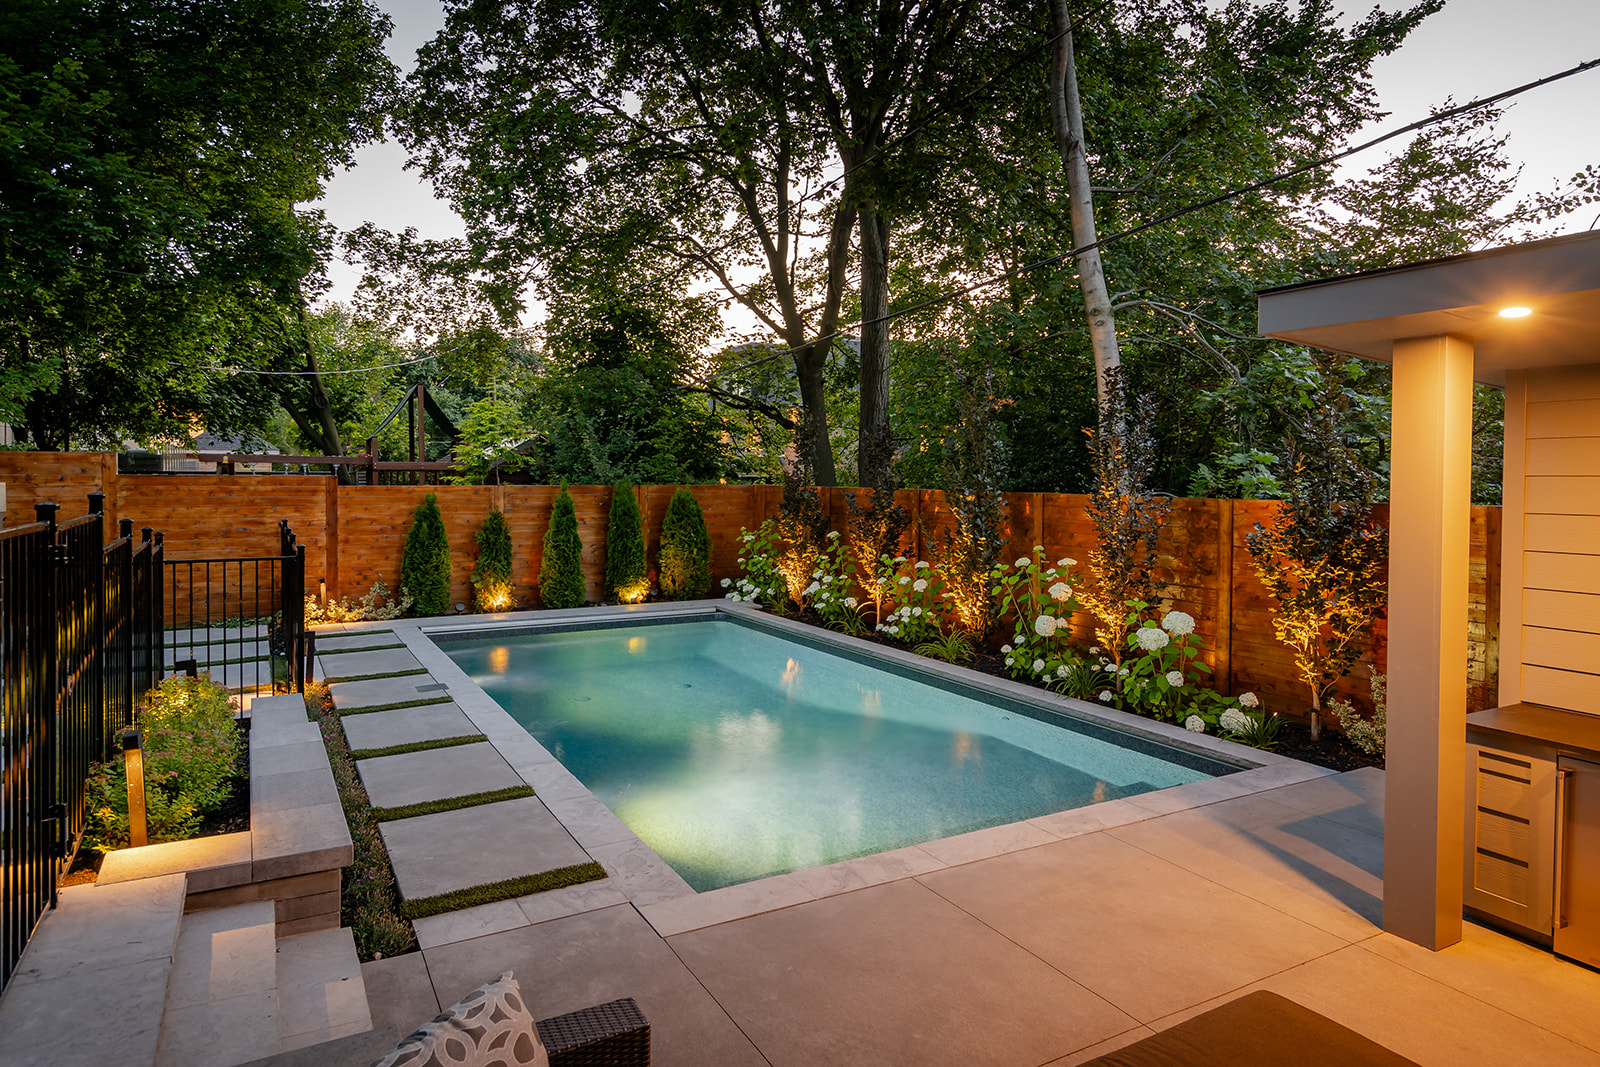 An inground rectangular pool with a garden lining the fence.